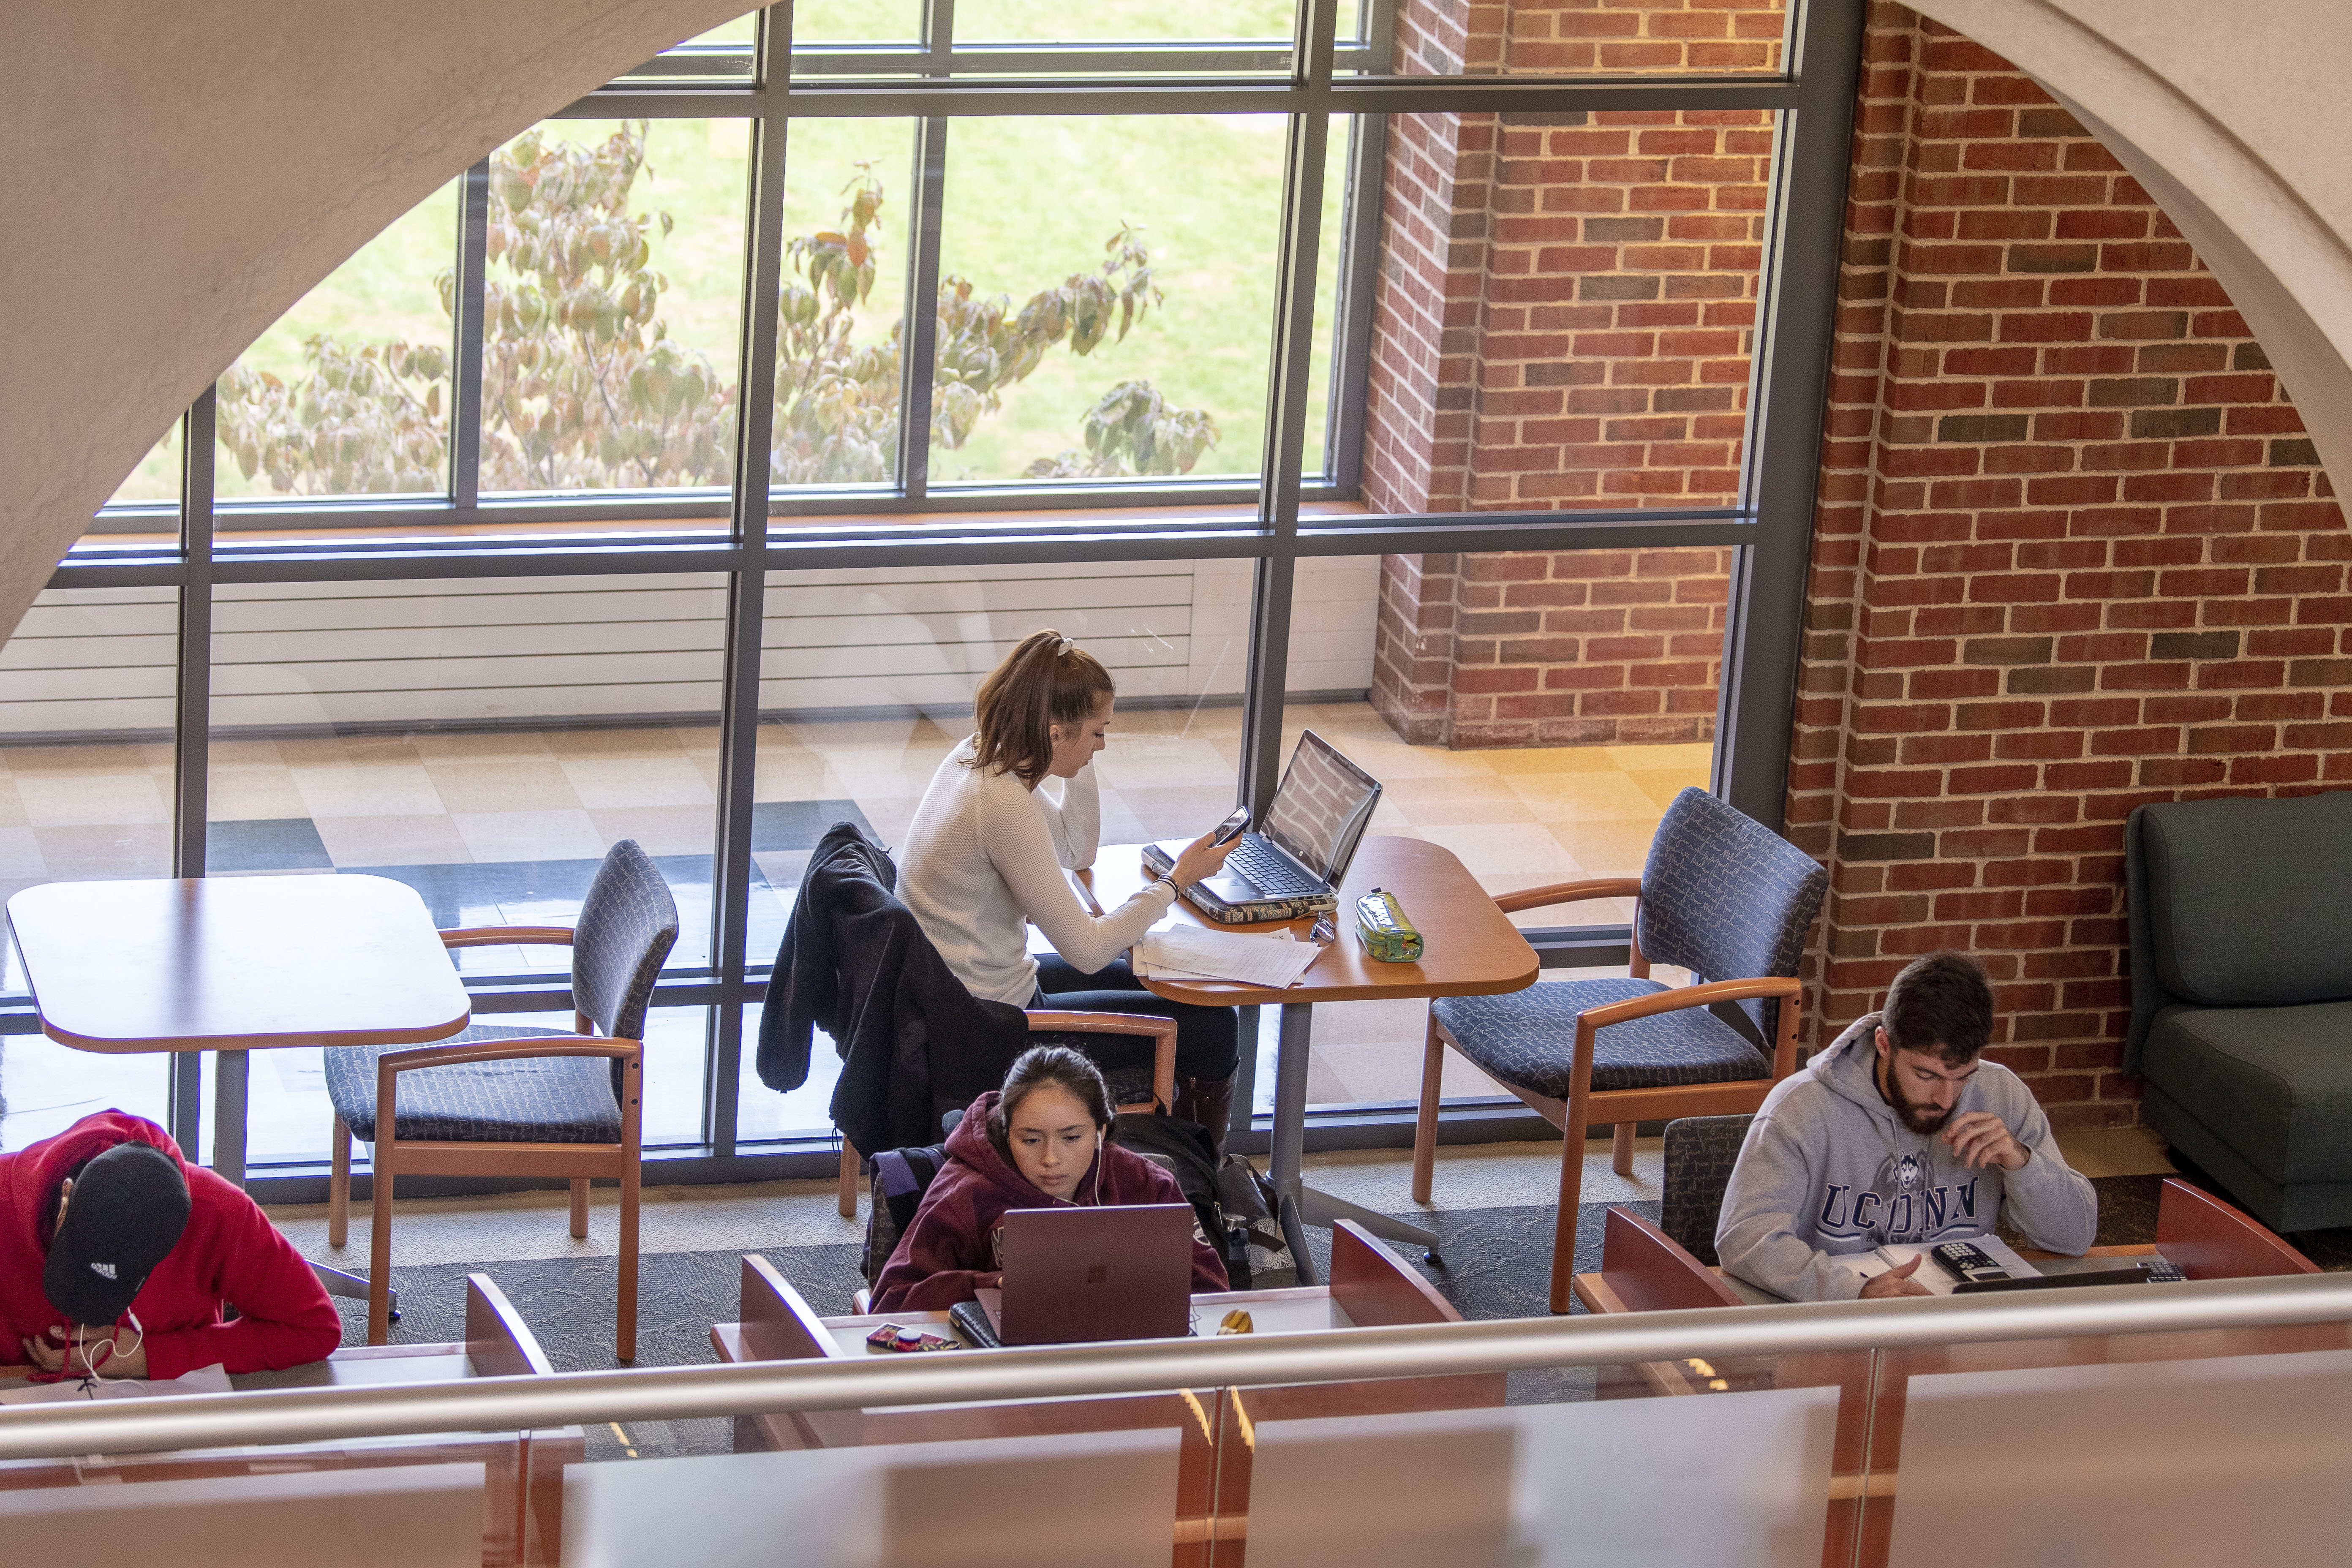 Students studying at UConn Waterbury on Oct. 25, 2018. (Sean Flynn/UConn Photo)